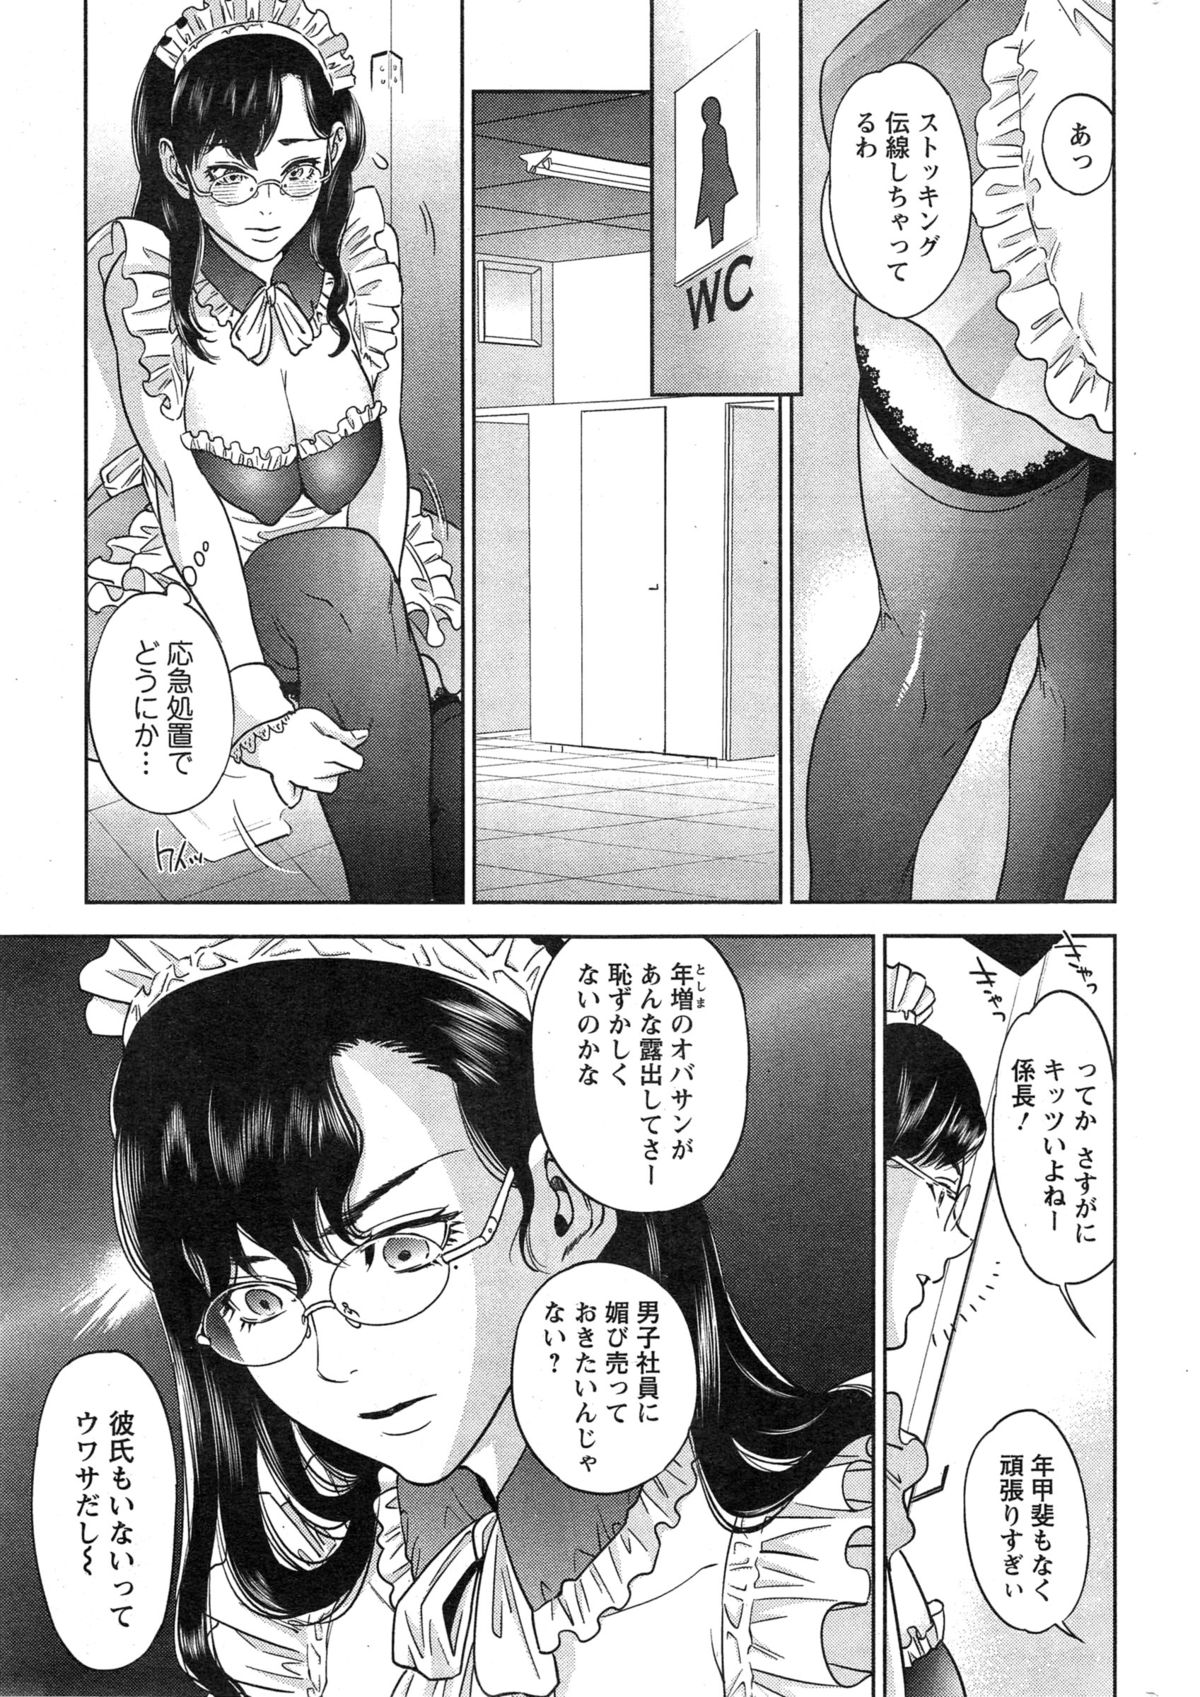 Action Pizazz Cgumi 2015-02 page 13 full